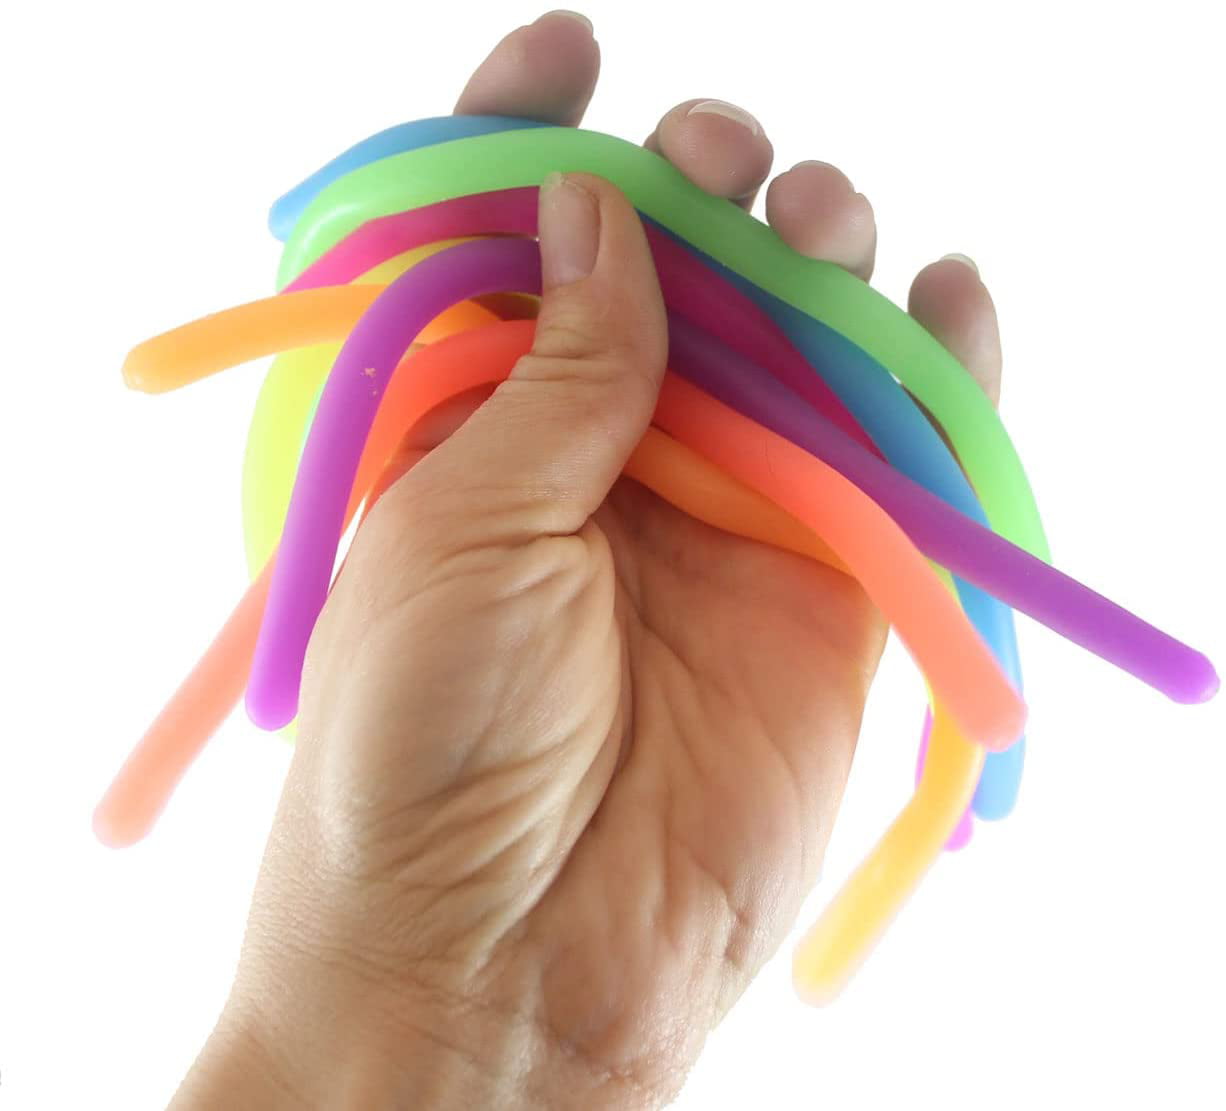 Stretch String Fidget Toy- Worm Noodle Strings Fidget Toy - 14 Long,  Thick, Build Resistance for Strengthening Exercise, Pull, Stretchy, Fiddle